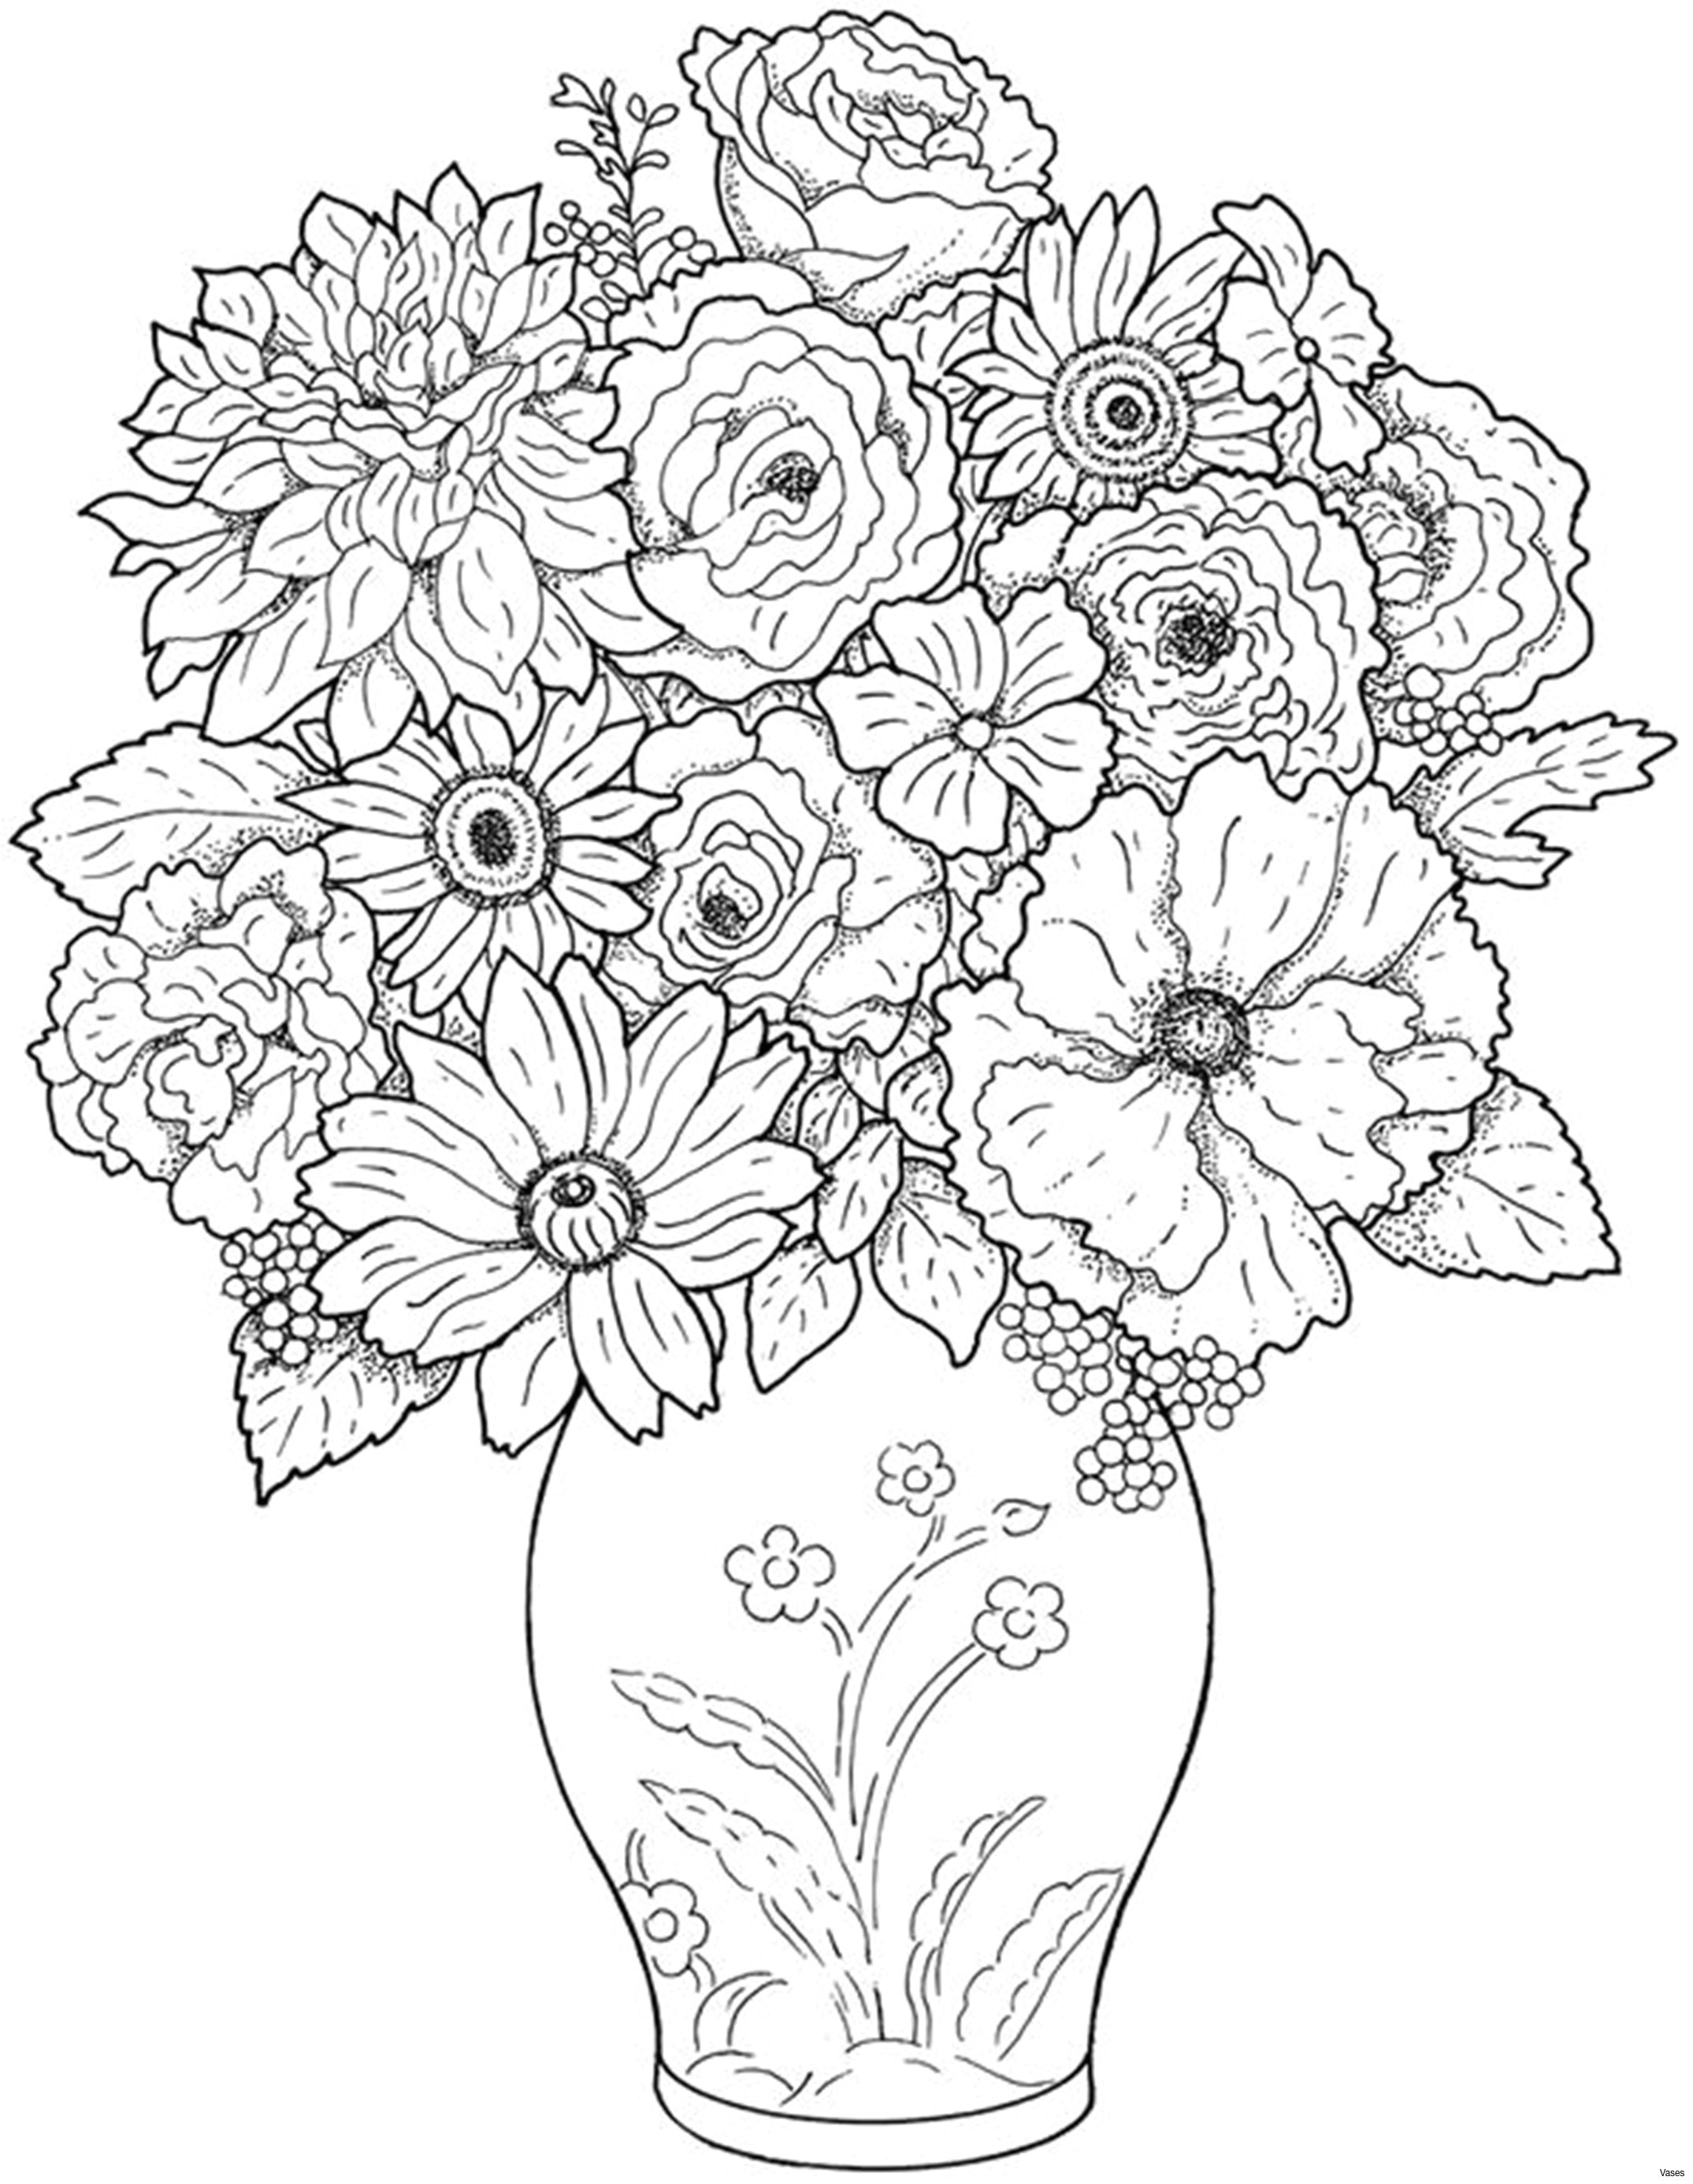 Drawing Flowers On the Www Colouring Pages Aua Ergewohnliche Cool Vases Flower Vase Coloring